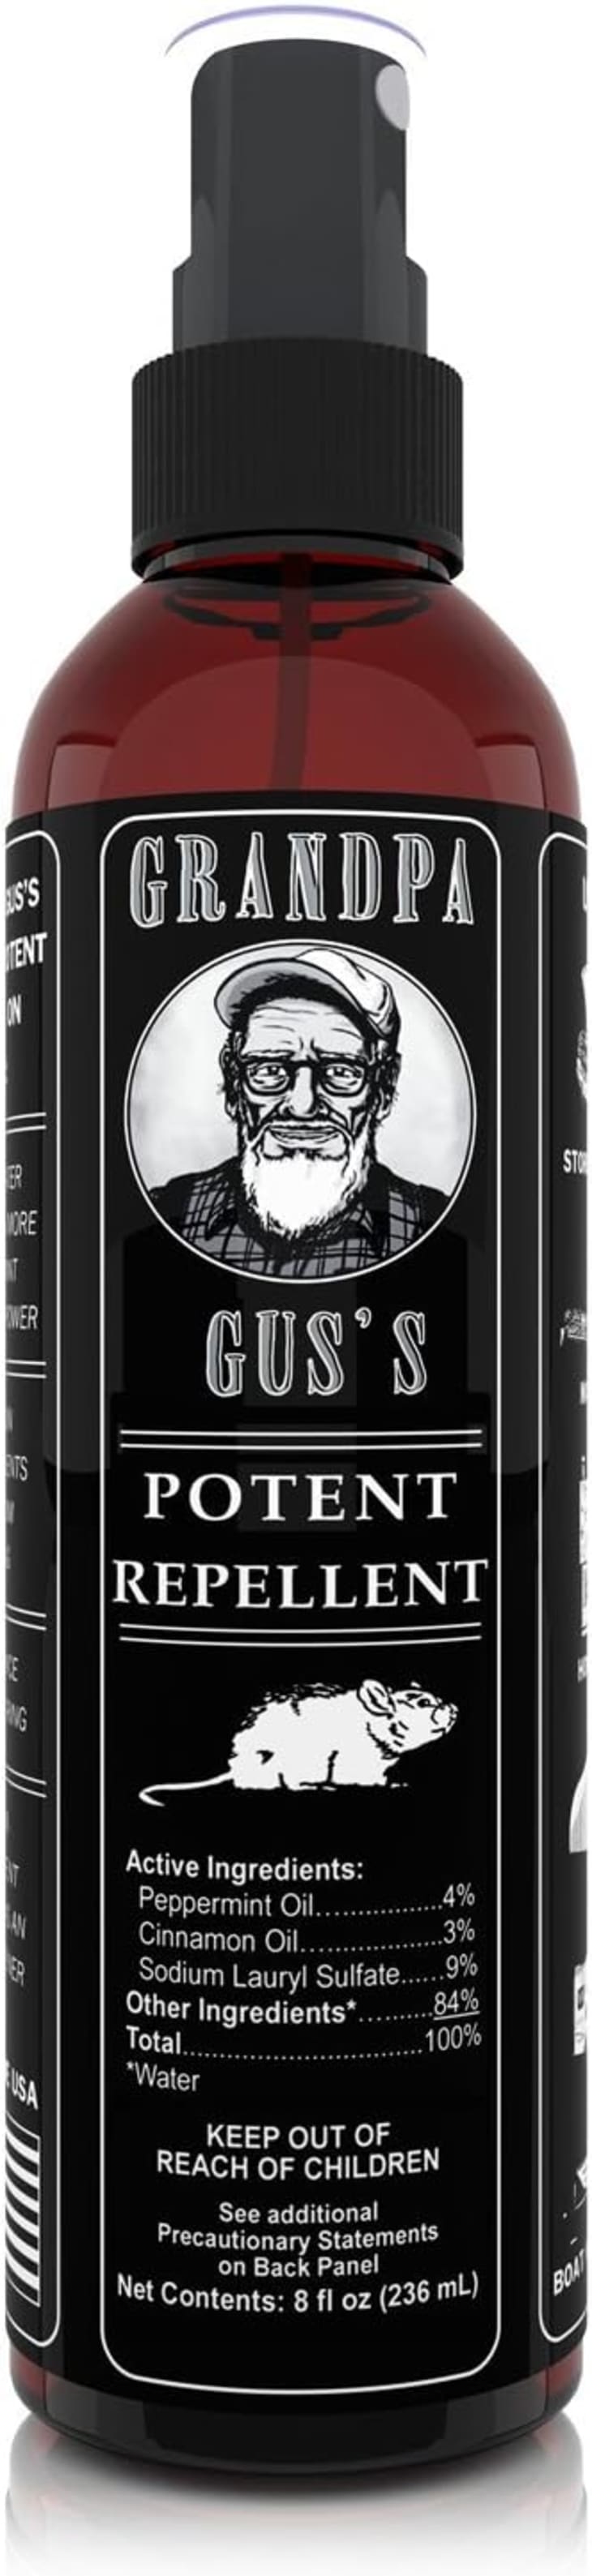 Grandpa Gus's Mouse Rodent Repellent at Amazon